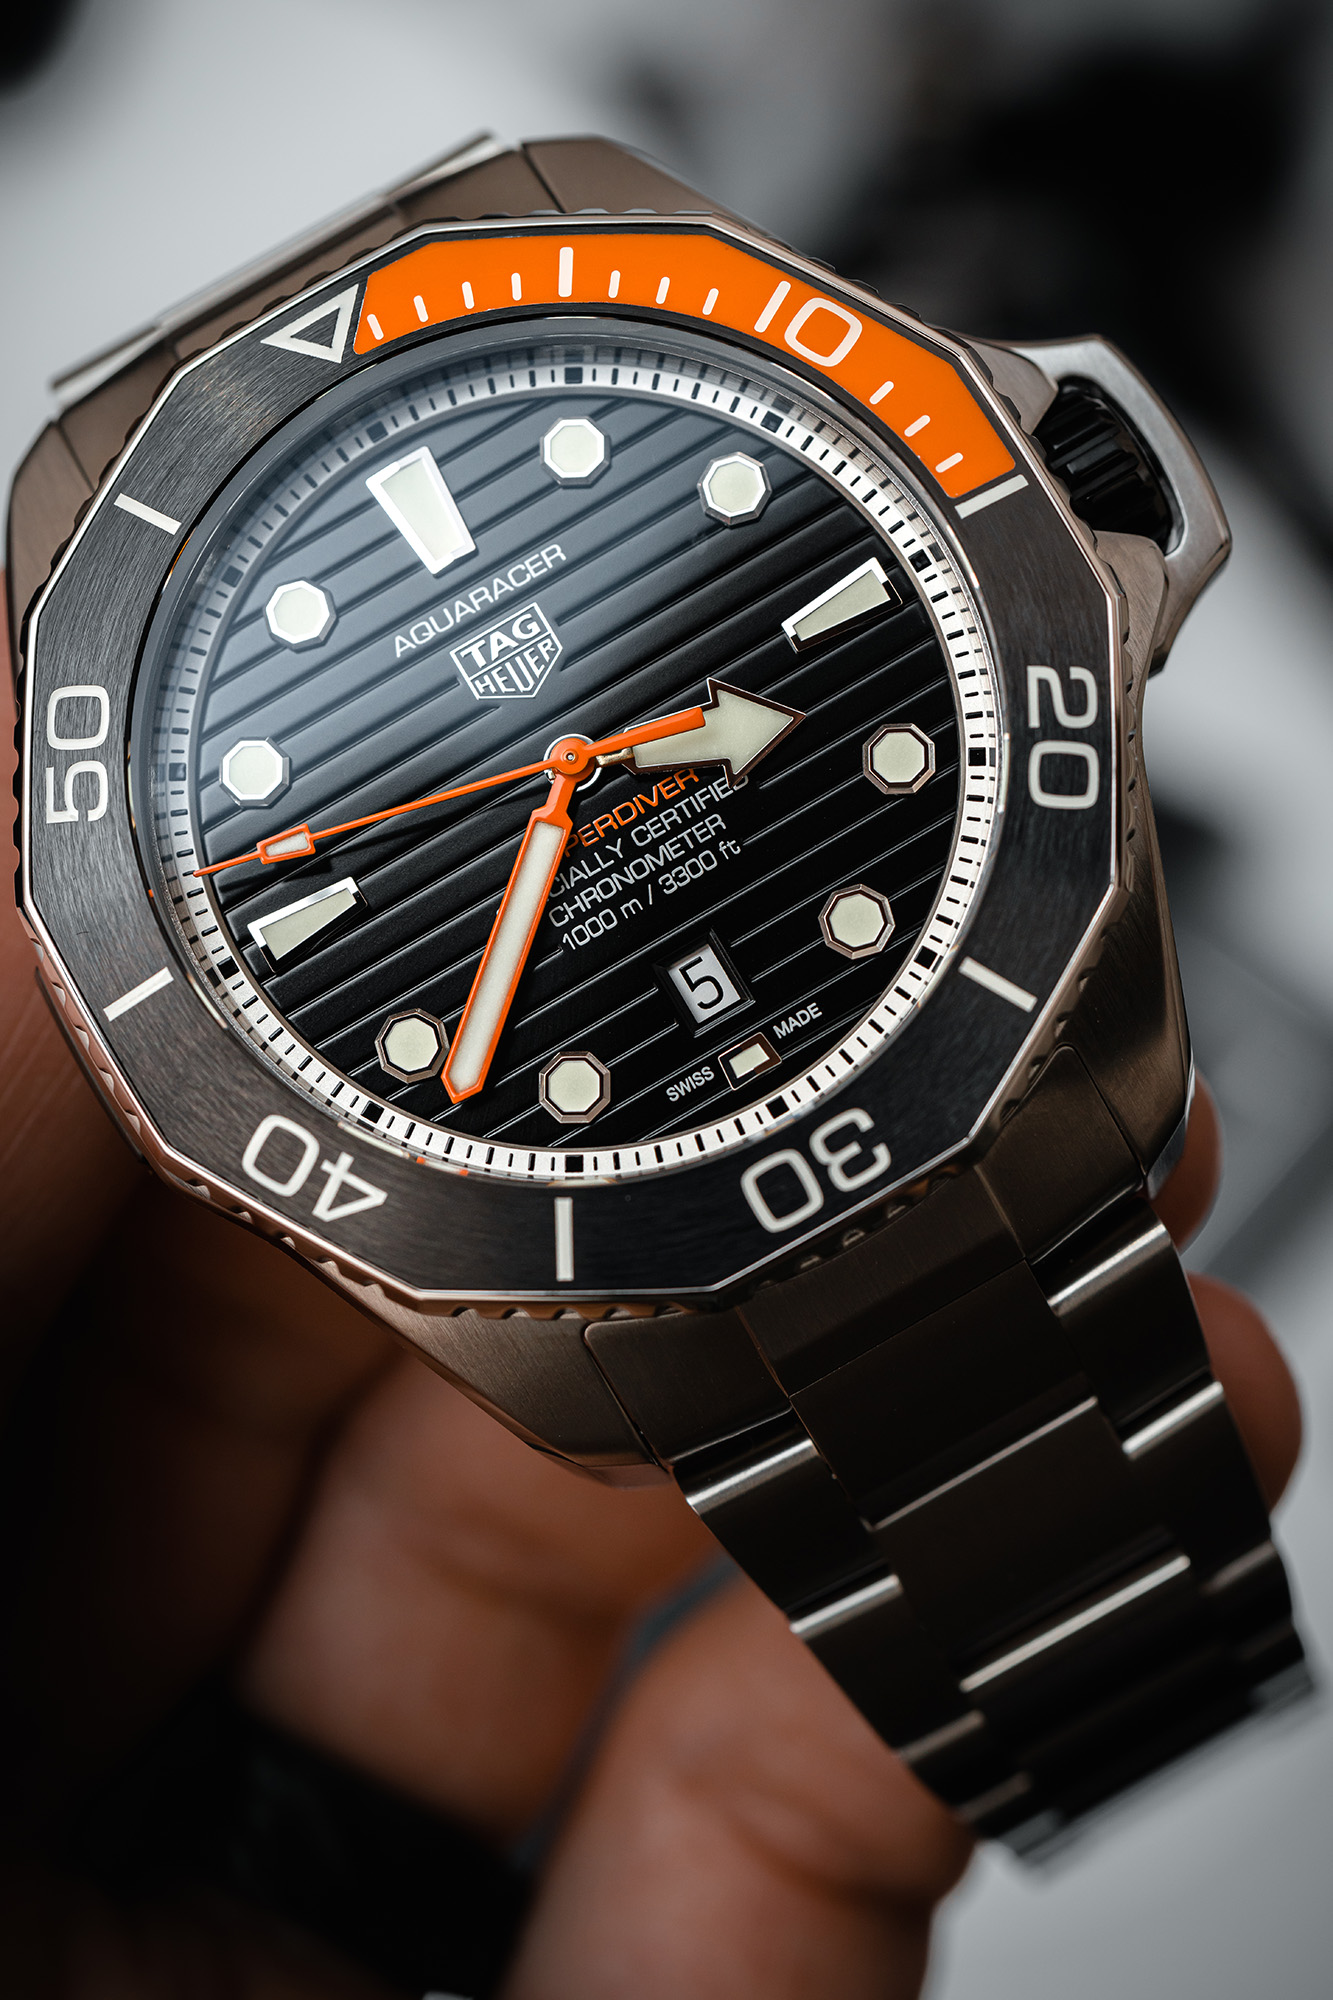 NEW DEPTHS: TAG HEUER UNVEILS THE ULTIMATE DIVING WATCH